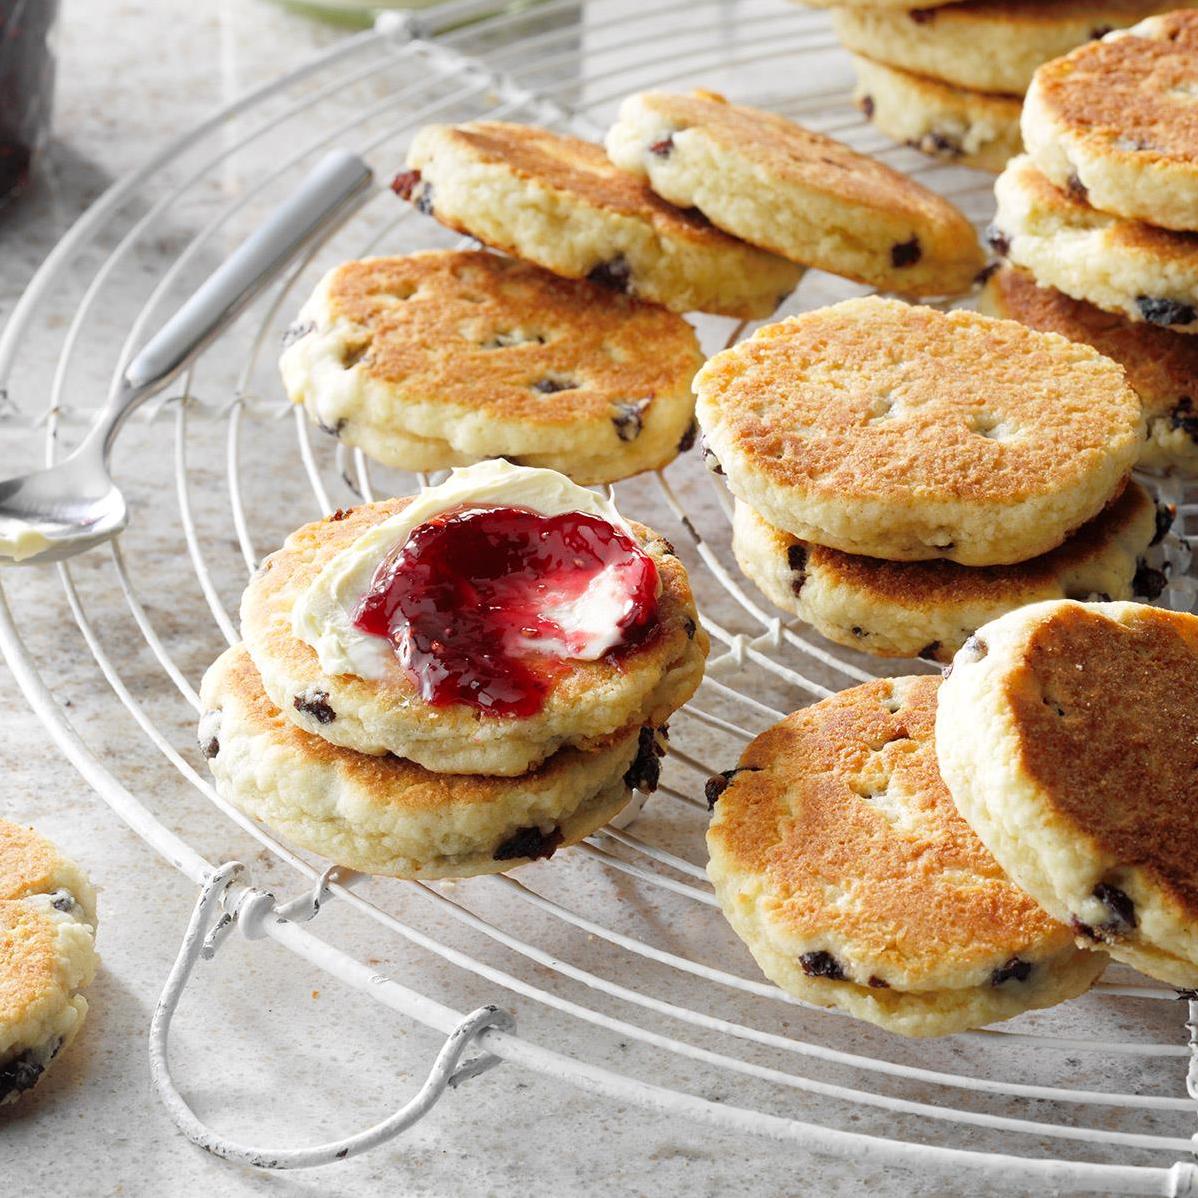  These Christmas Welsh cakes are the perfect treat to cozy up with during the holidays.